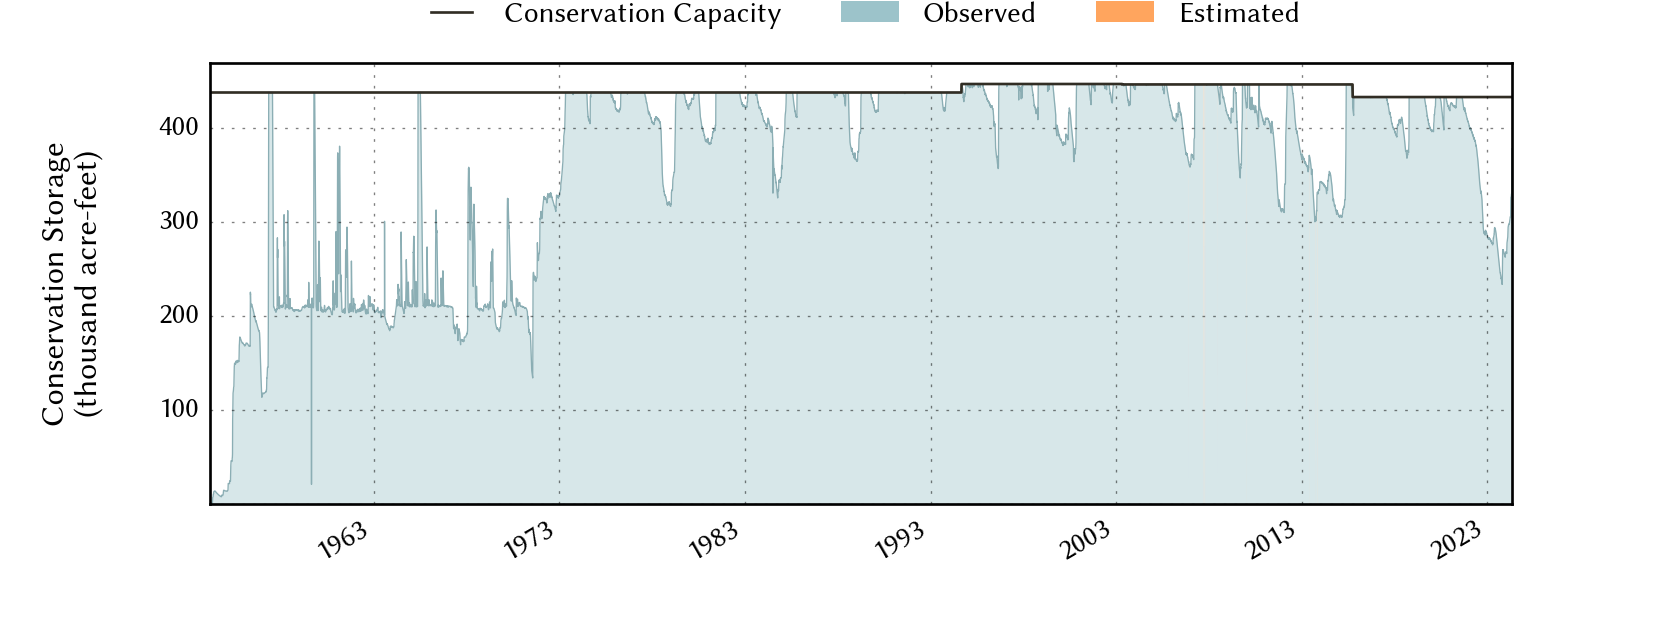 plot of storage data for the entire period of record